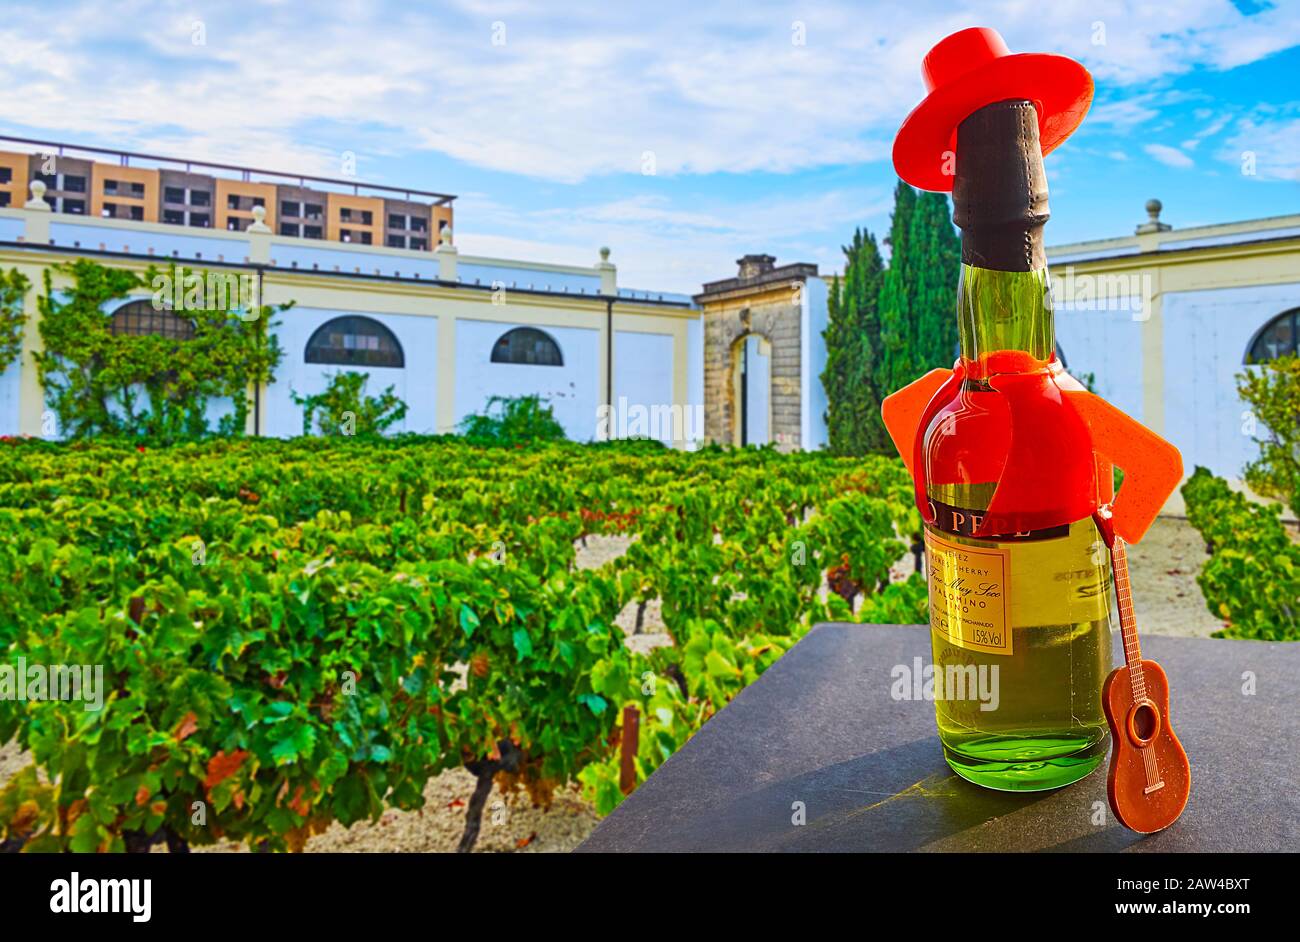 JEREZ, SPAIN - SEPTEMBER 20, 2019: The bottle of sherry wine in hat, jacket and holding guitar (Tio Pepe logo) in front of vineyard, located in Bodega Stock Photo